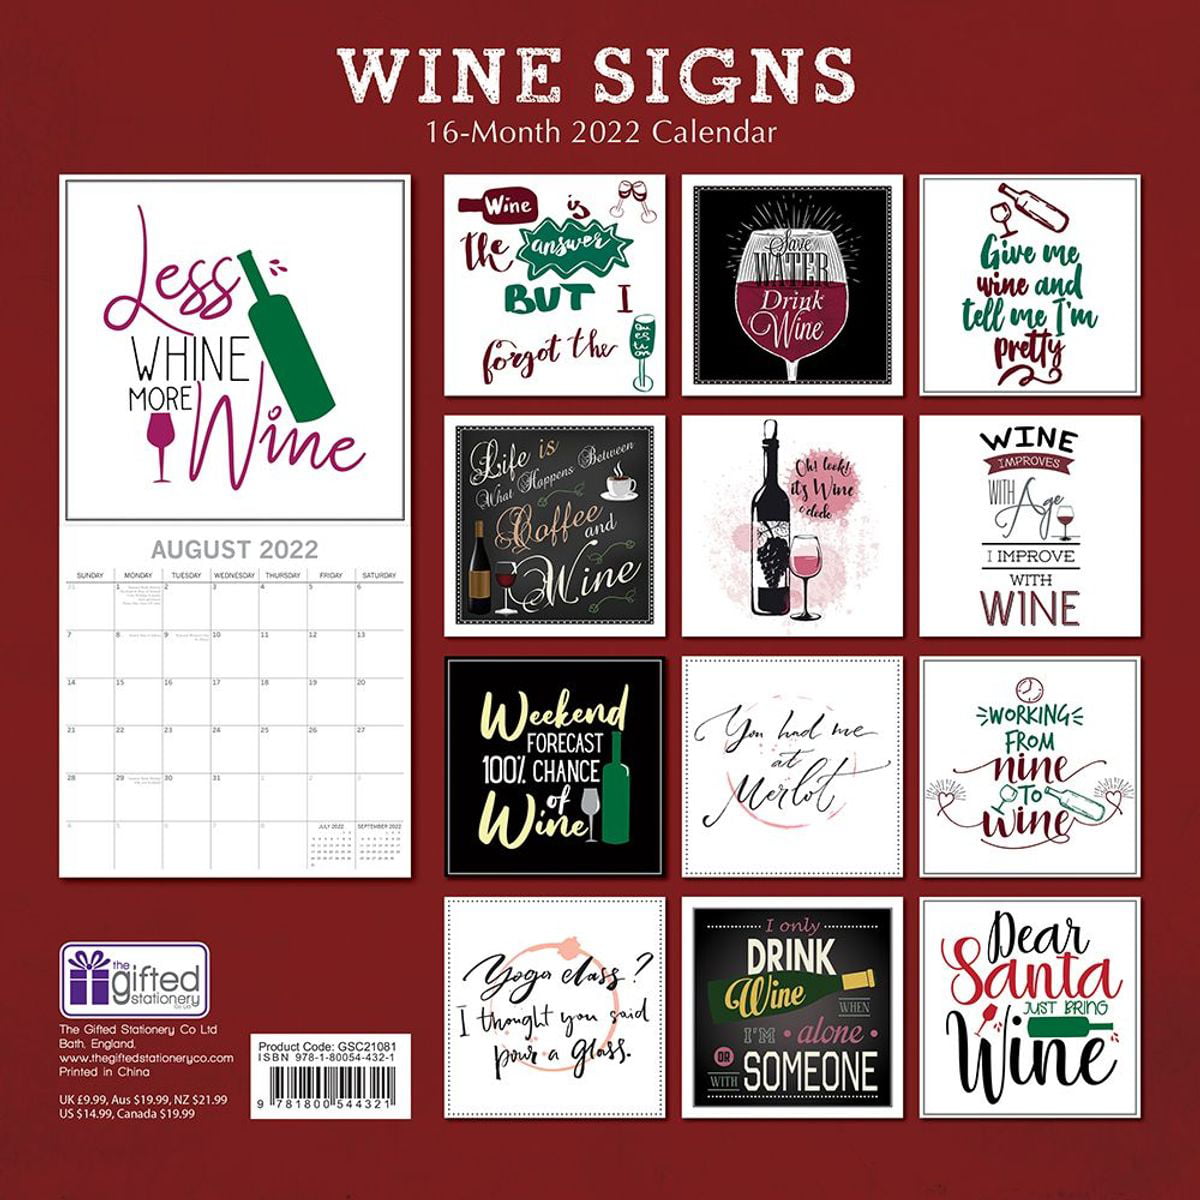 Funny Quotes Theme Wine Signs Calendar 12 x 12 Inch Monthly View 2021 Wall Calendar 16-Month Includes 180 Reminder Stickers 